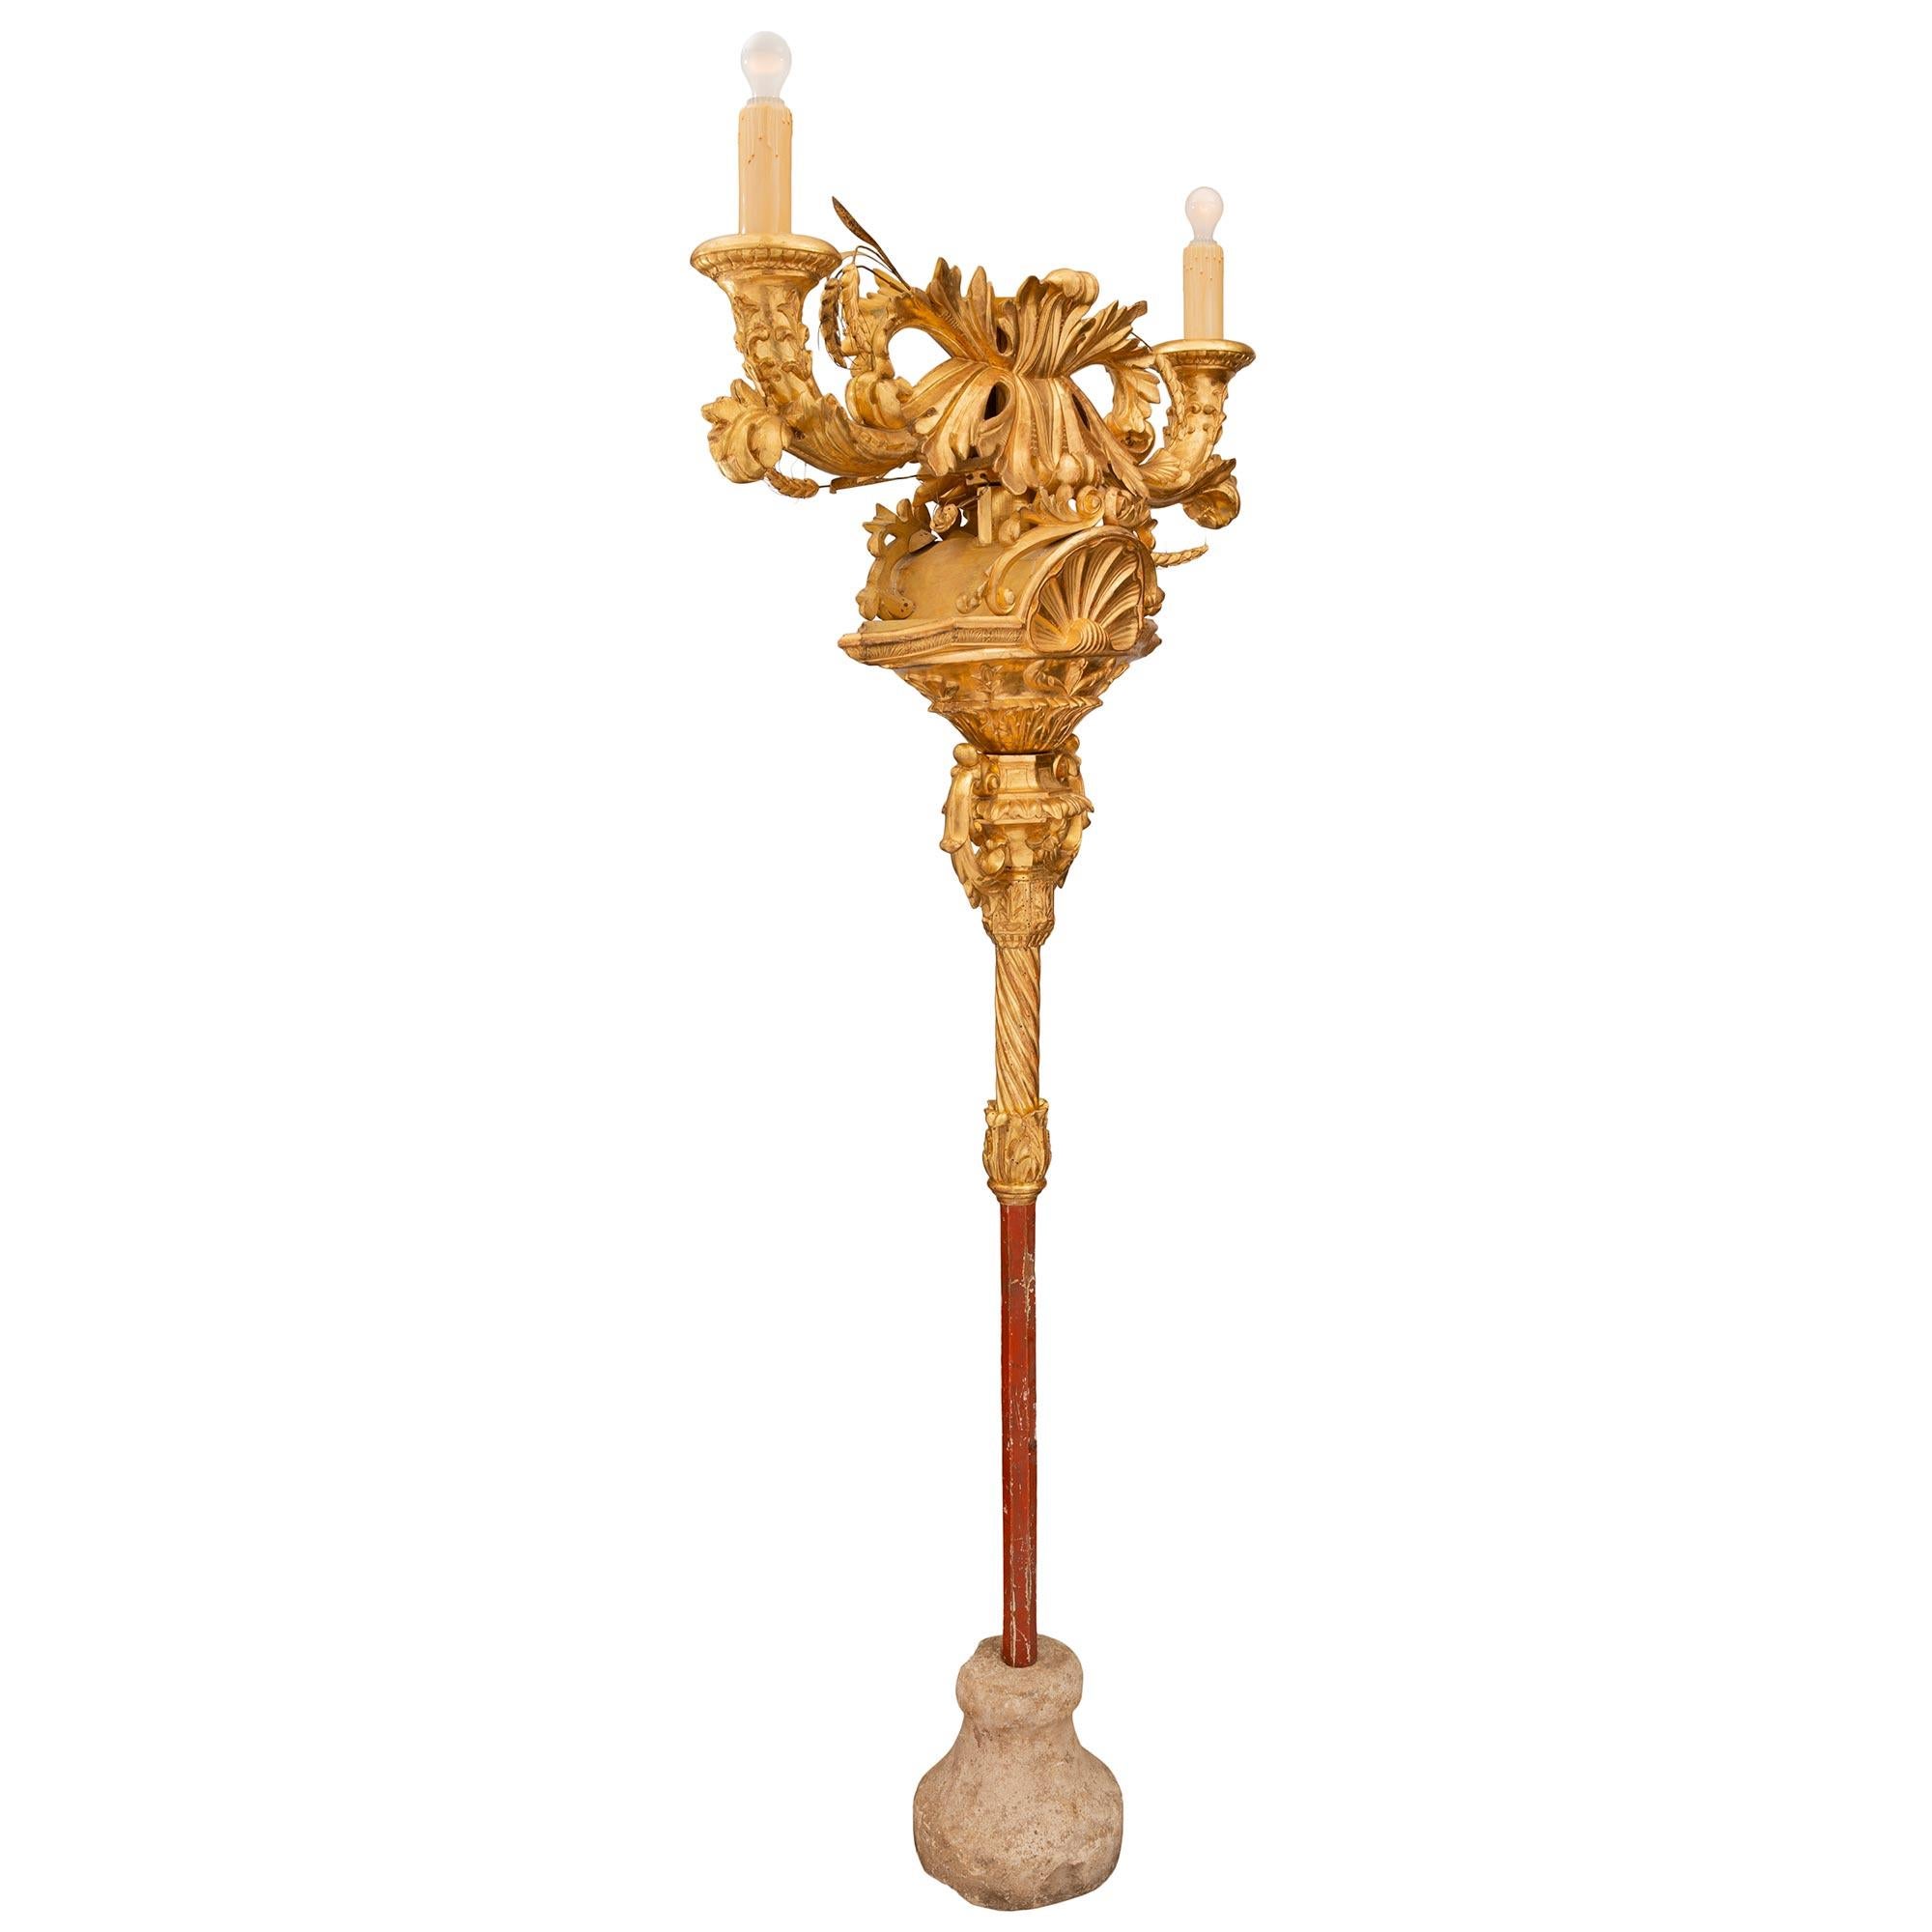 Italian Early 19th Century Giltwood Floor Lamp In Good Condition For Sale In West Palm Beach, FL